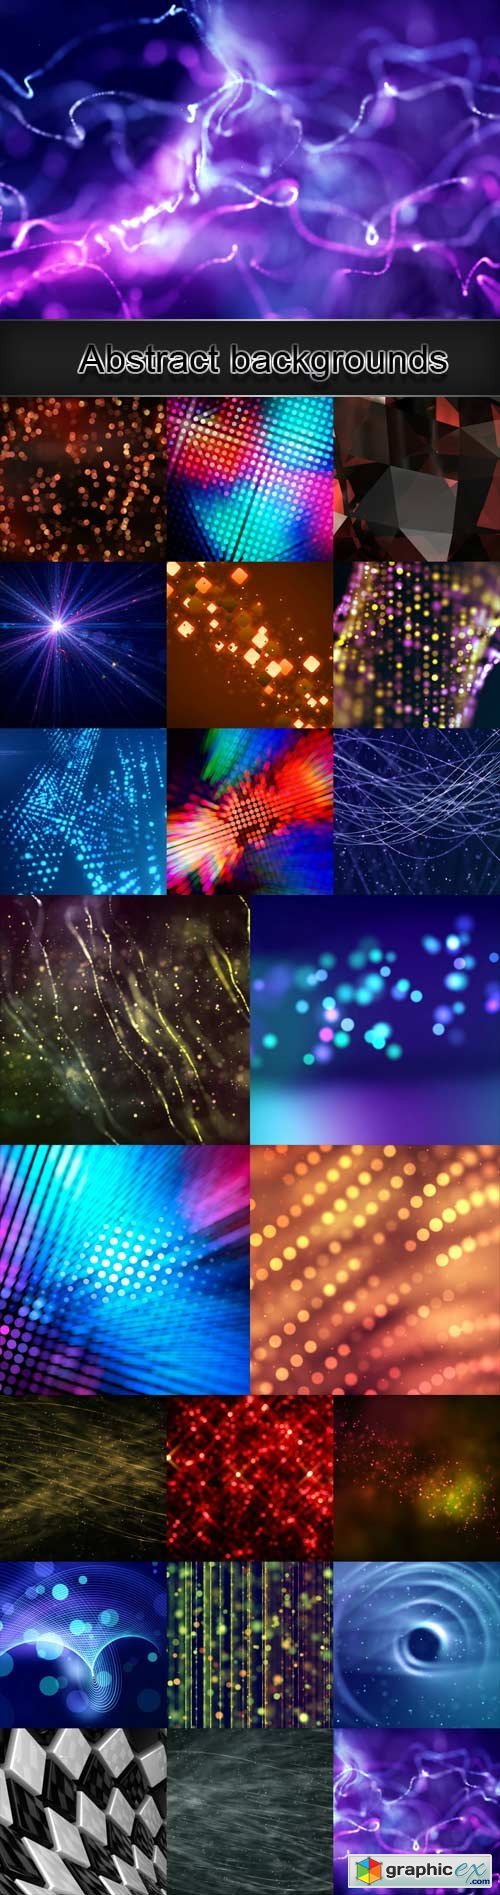 Abstract backgrounds for design